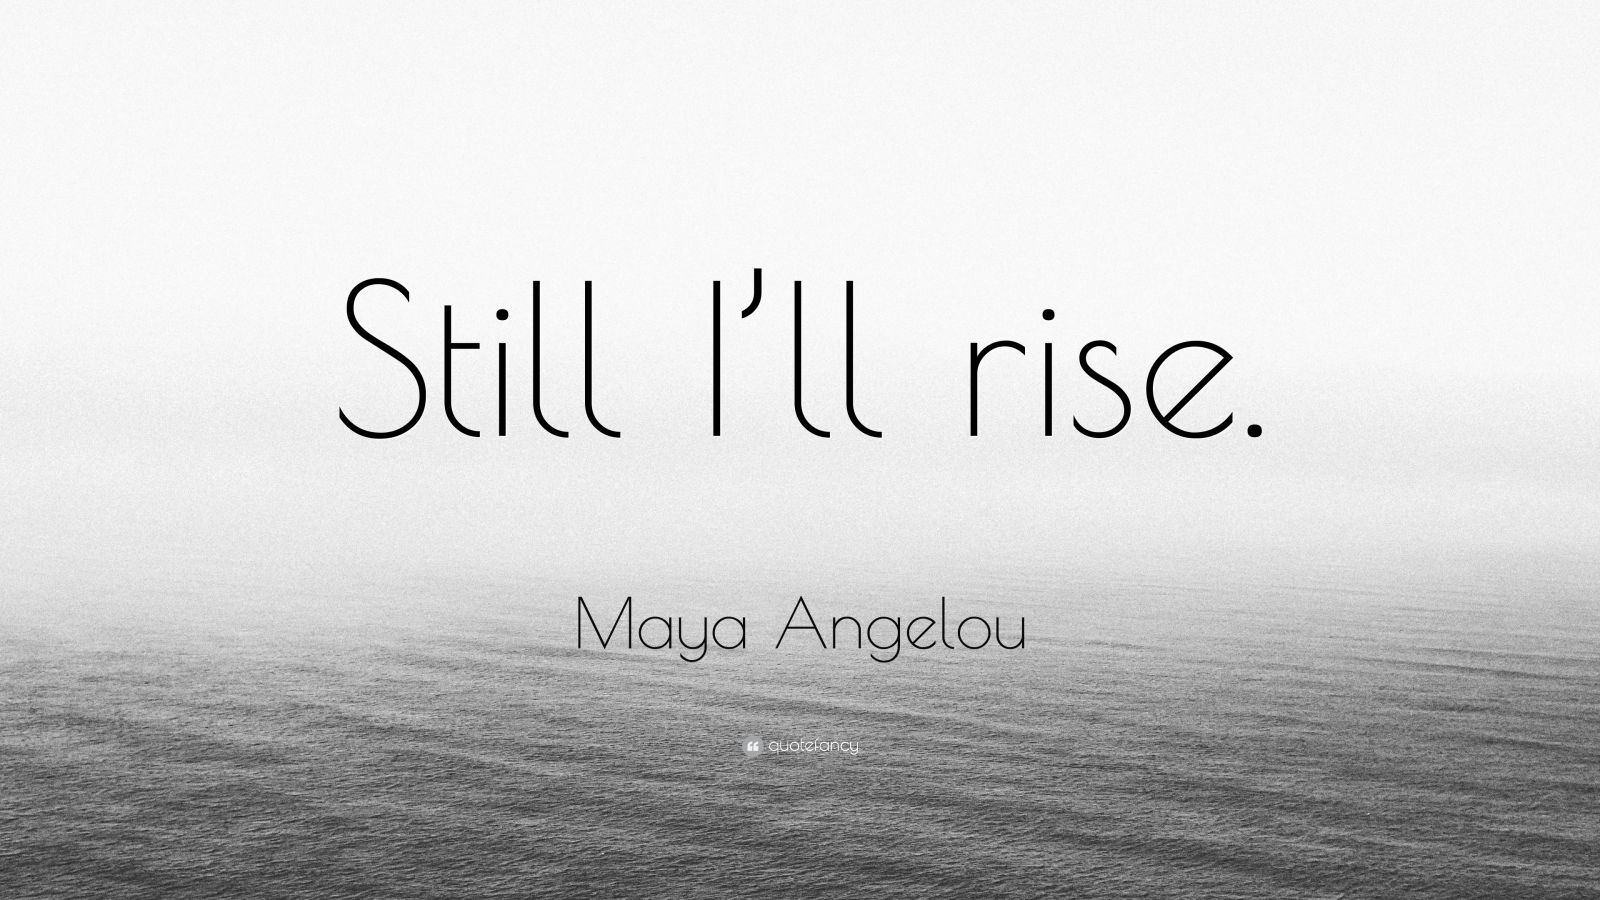 maya angelou still i rise meaning